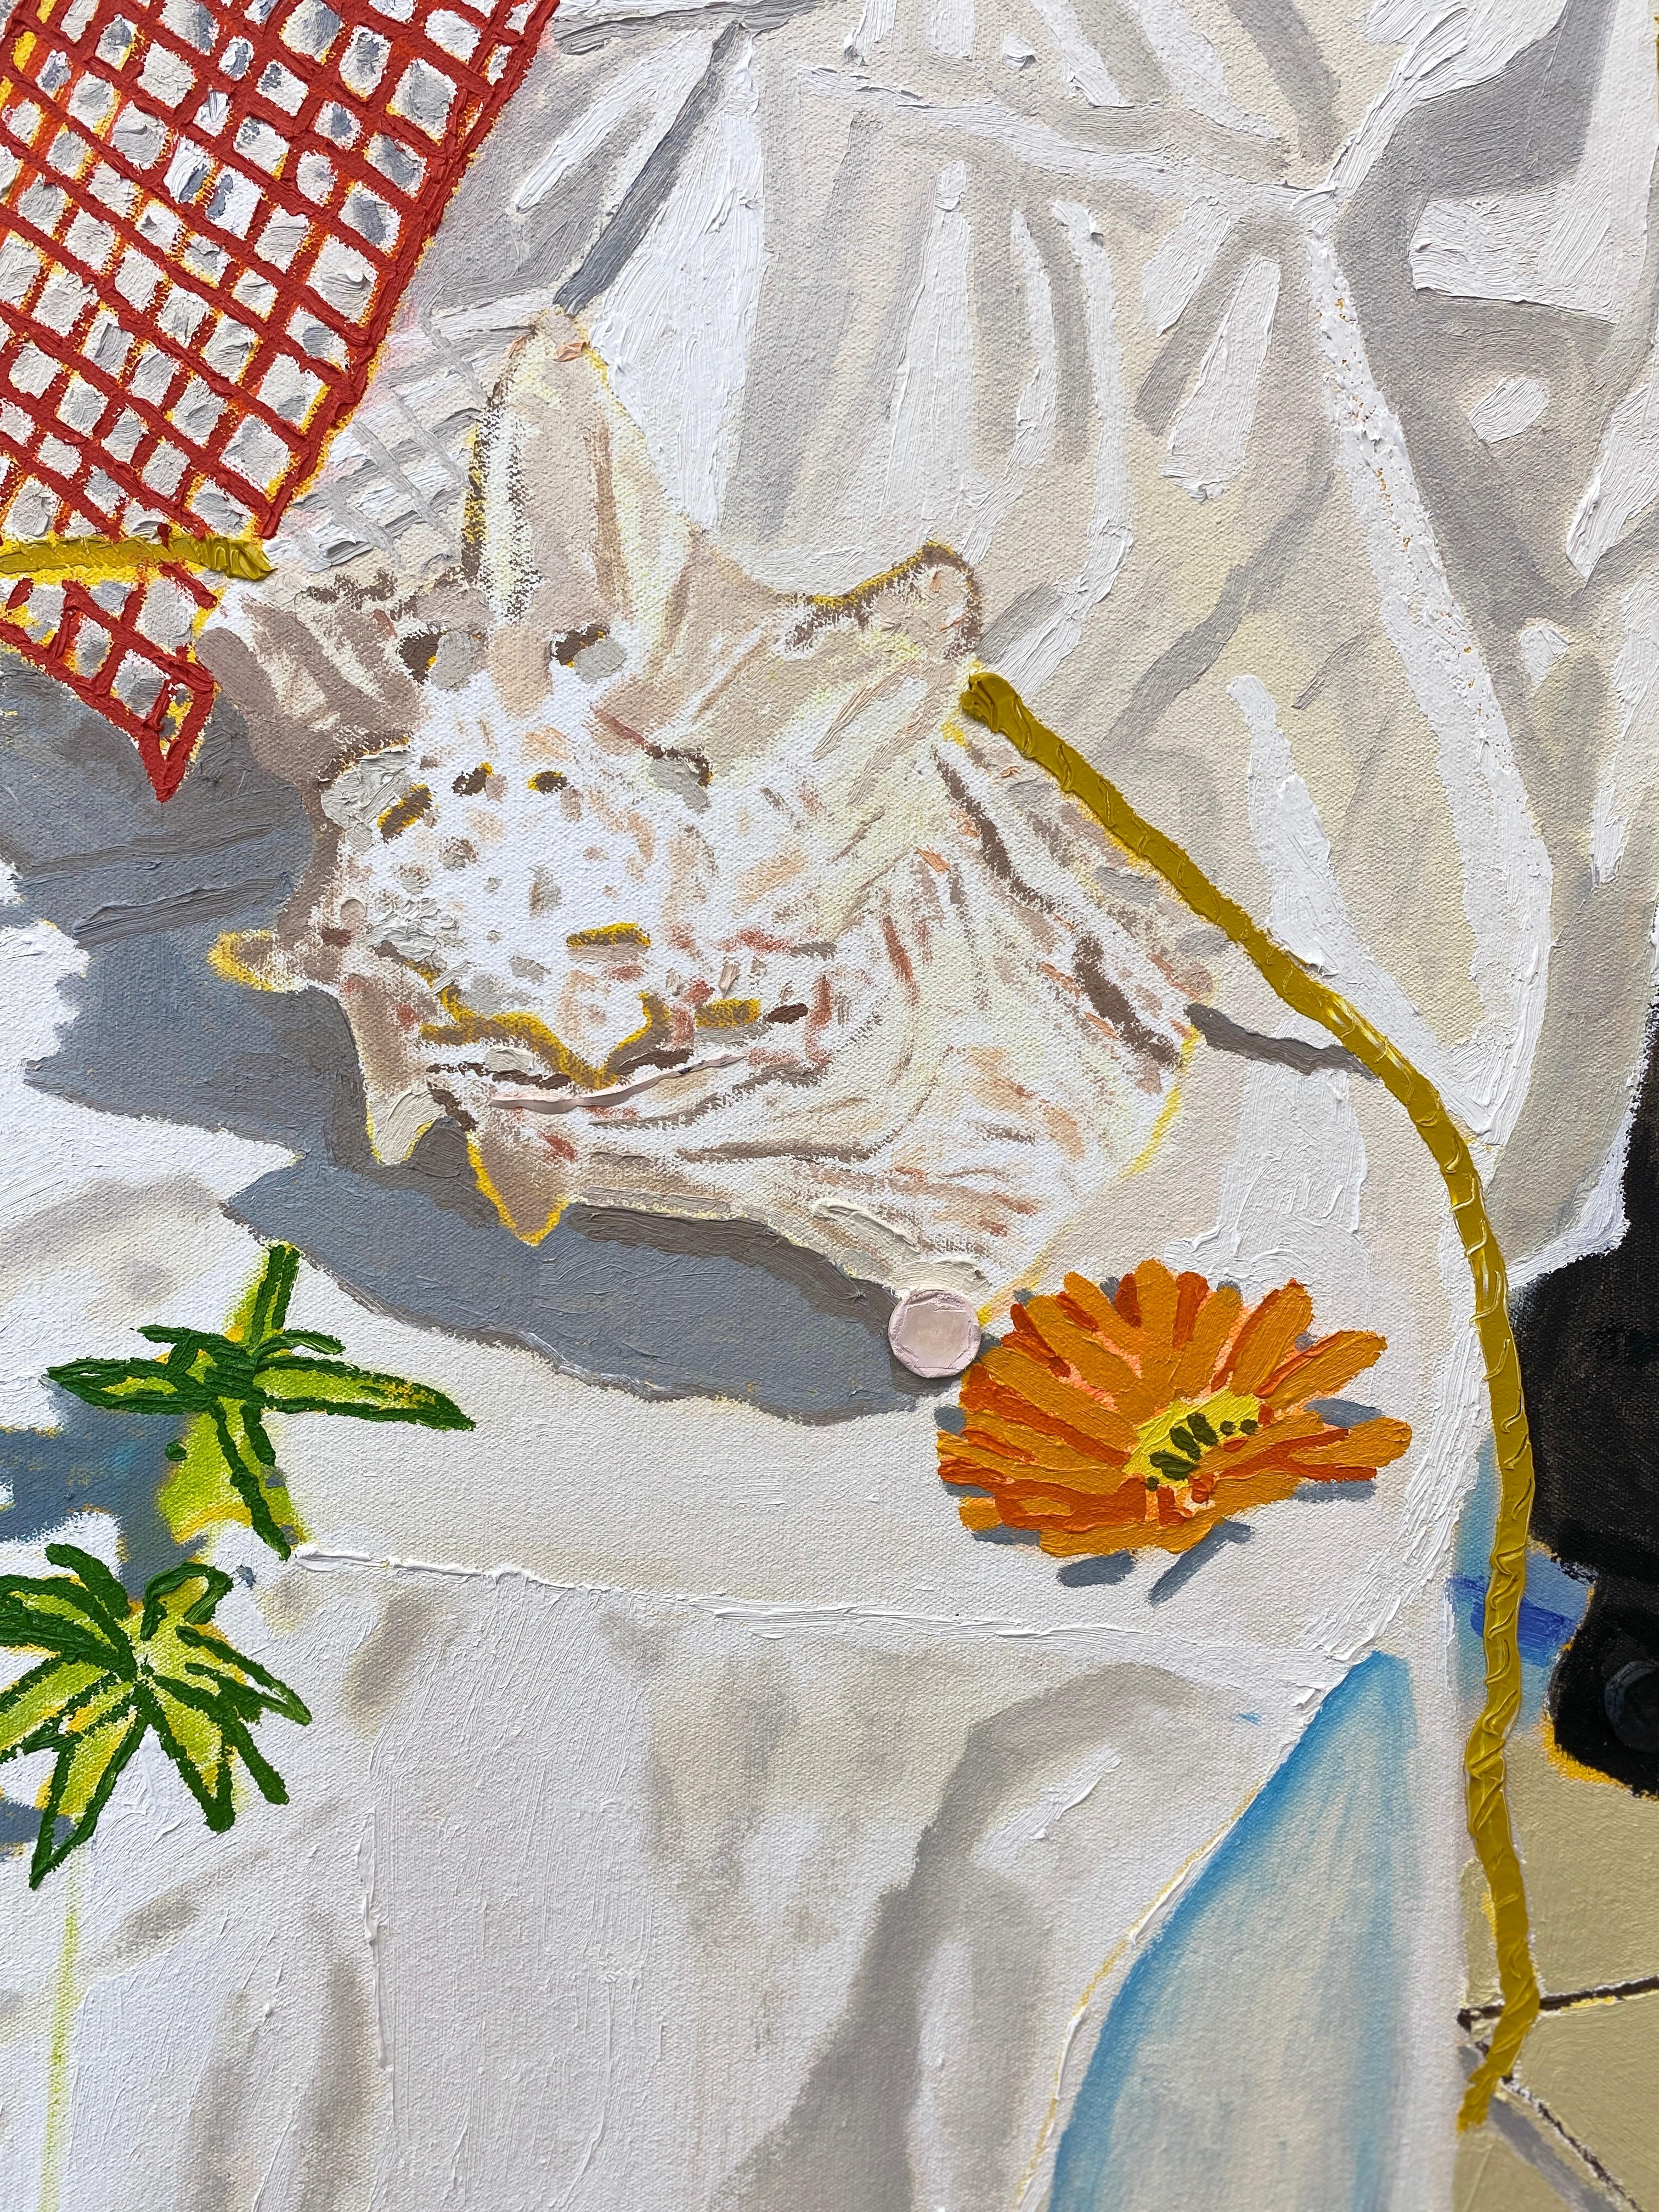 A 2017 contemporary still life painting by Bradley Kerl, measuring 66 inches tall by 48 inches wide. This oil painting depicts sea shells, plants, ropes, and various other items atop a rolling table, draped in a white sheet. 